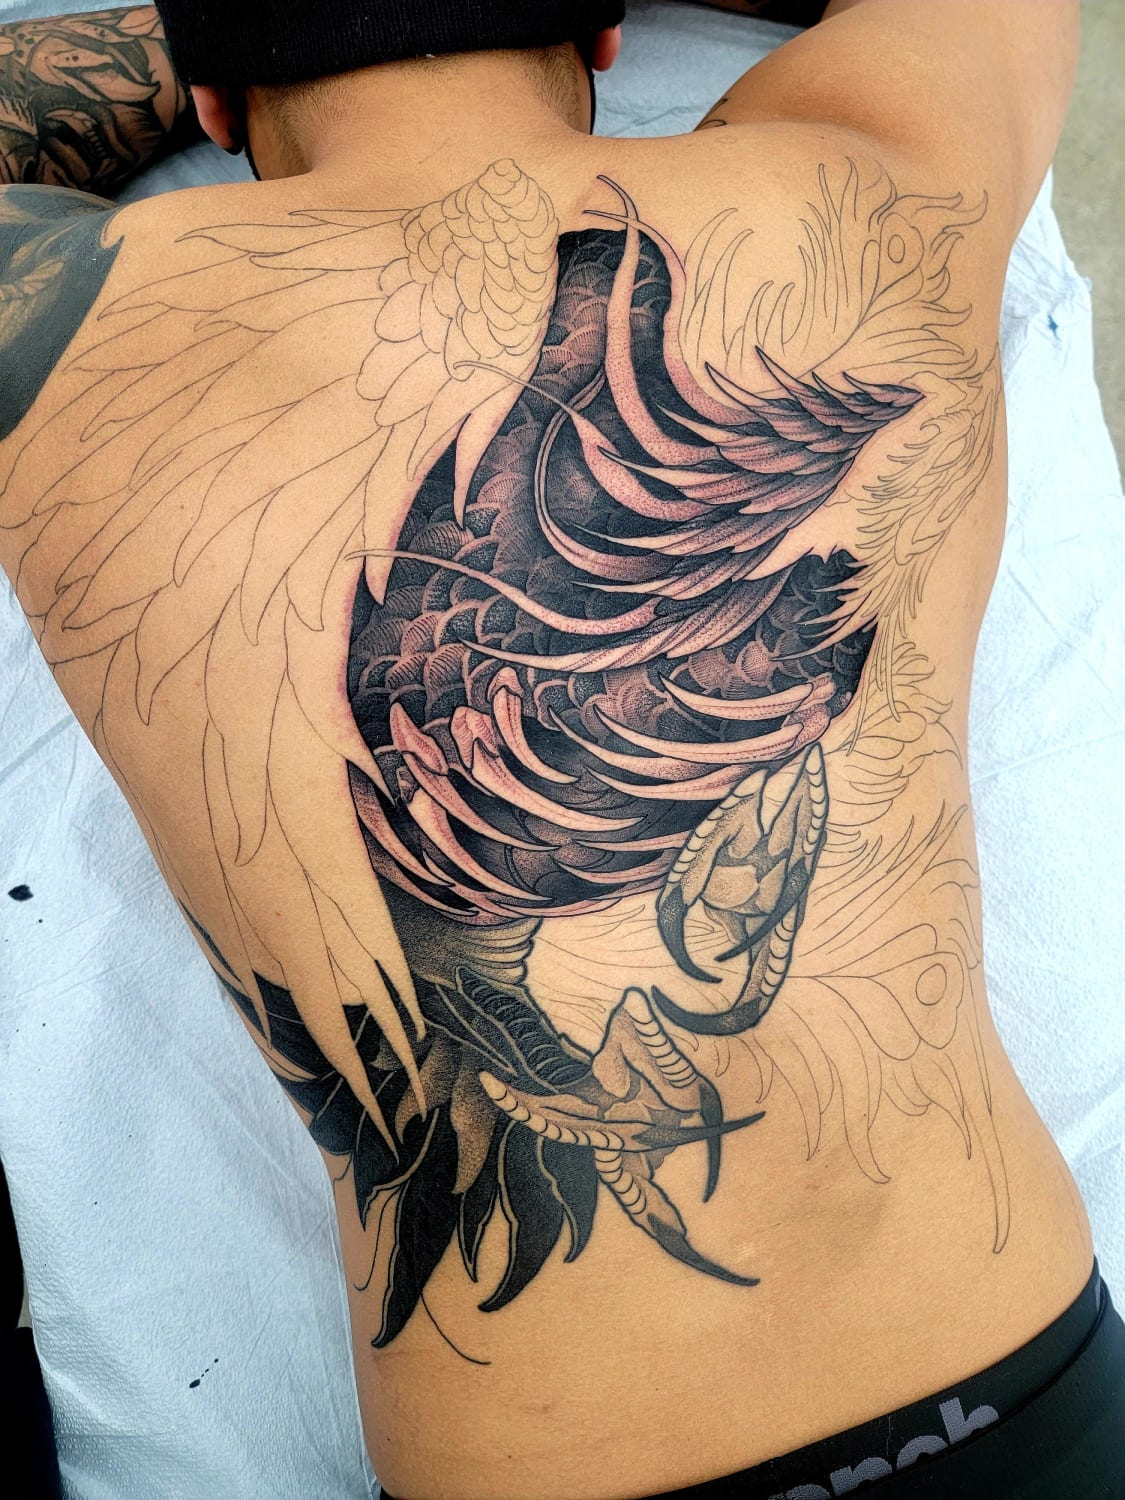 Progress on Phoenix. Done by felipexsanto at ink & water mississauga